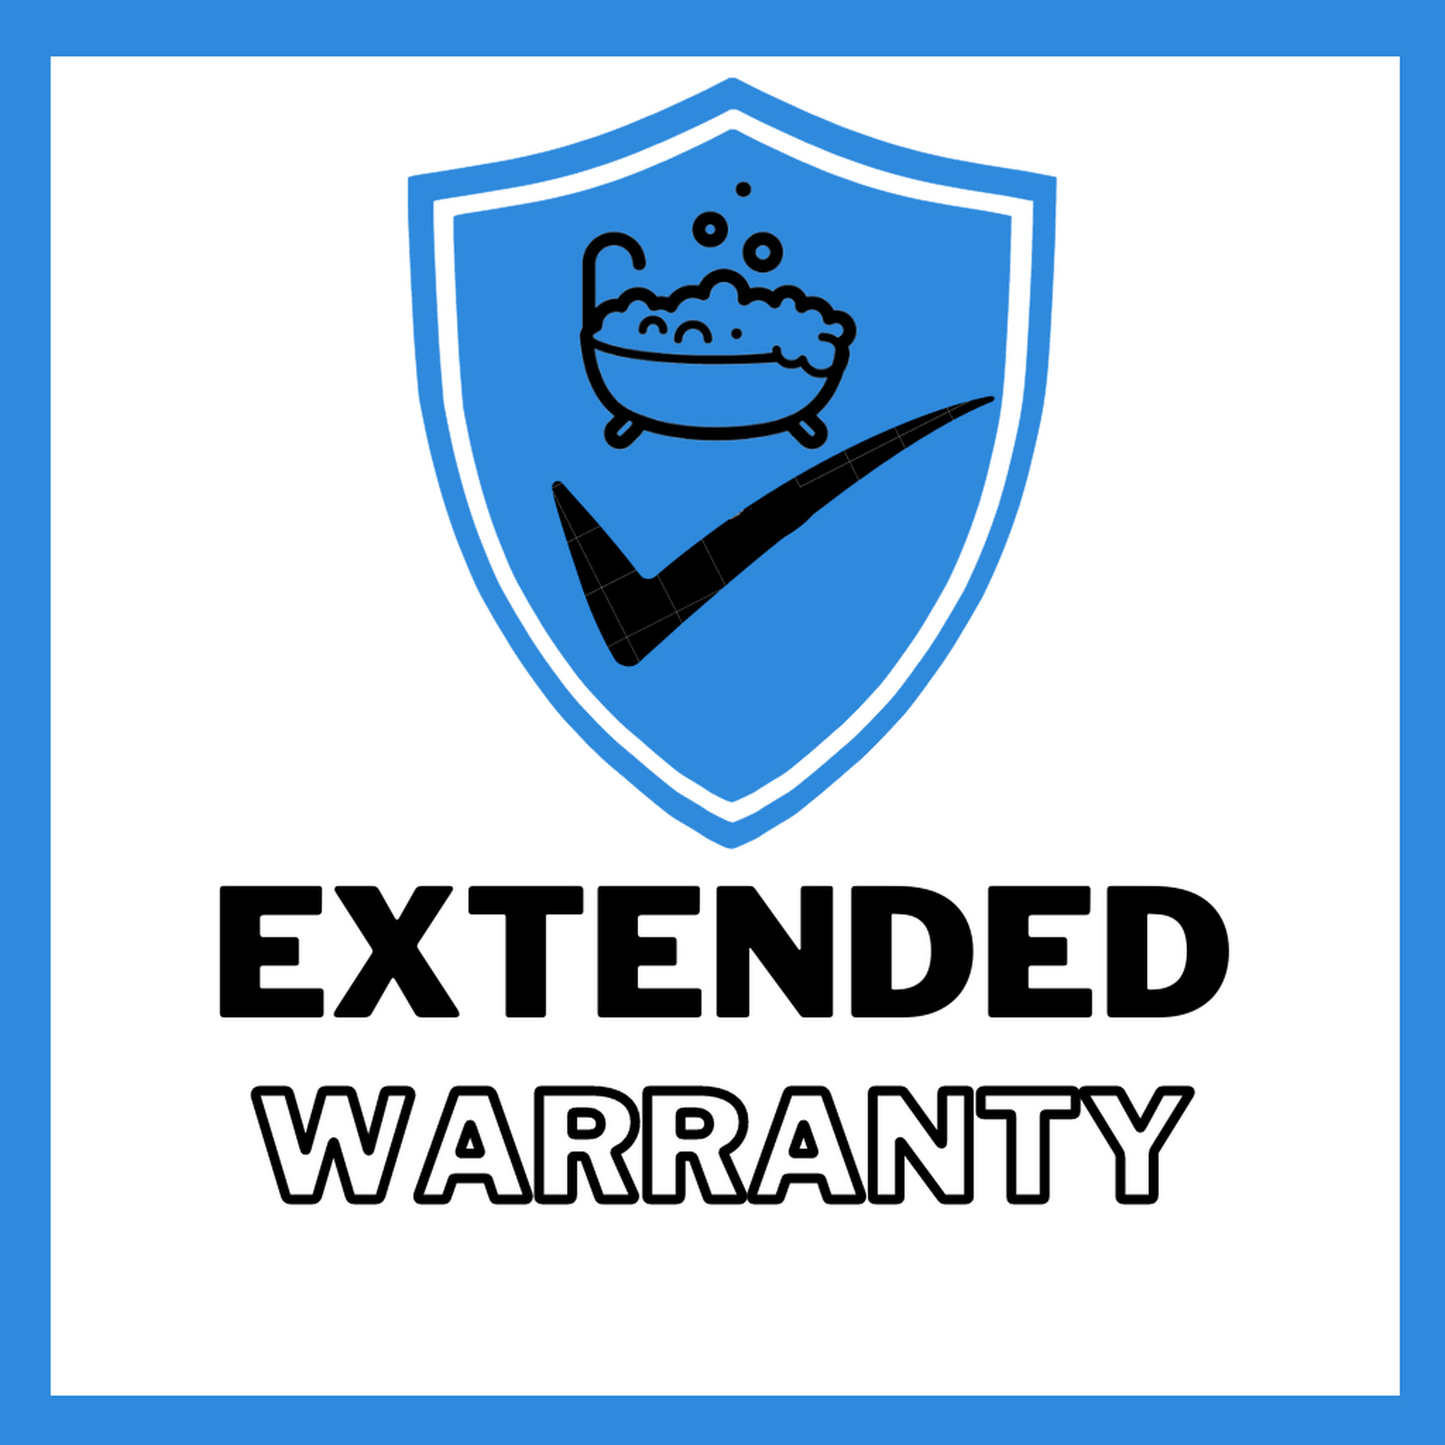 Extended Warranty [applies to products under $1999]